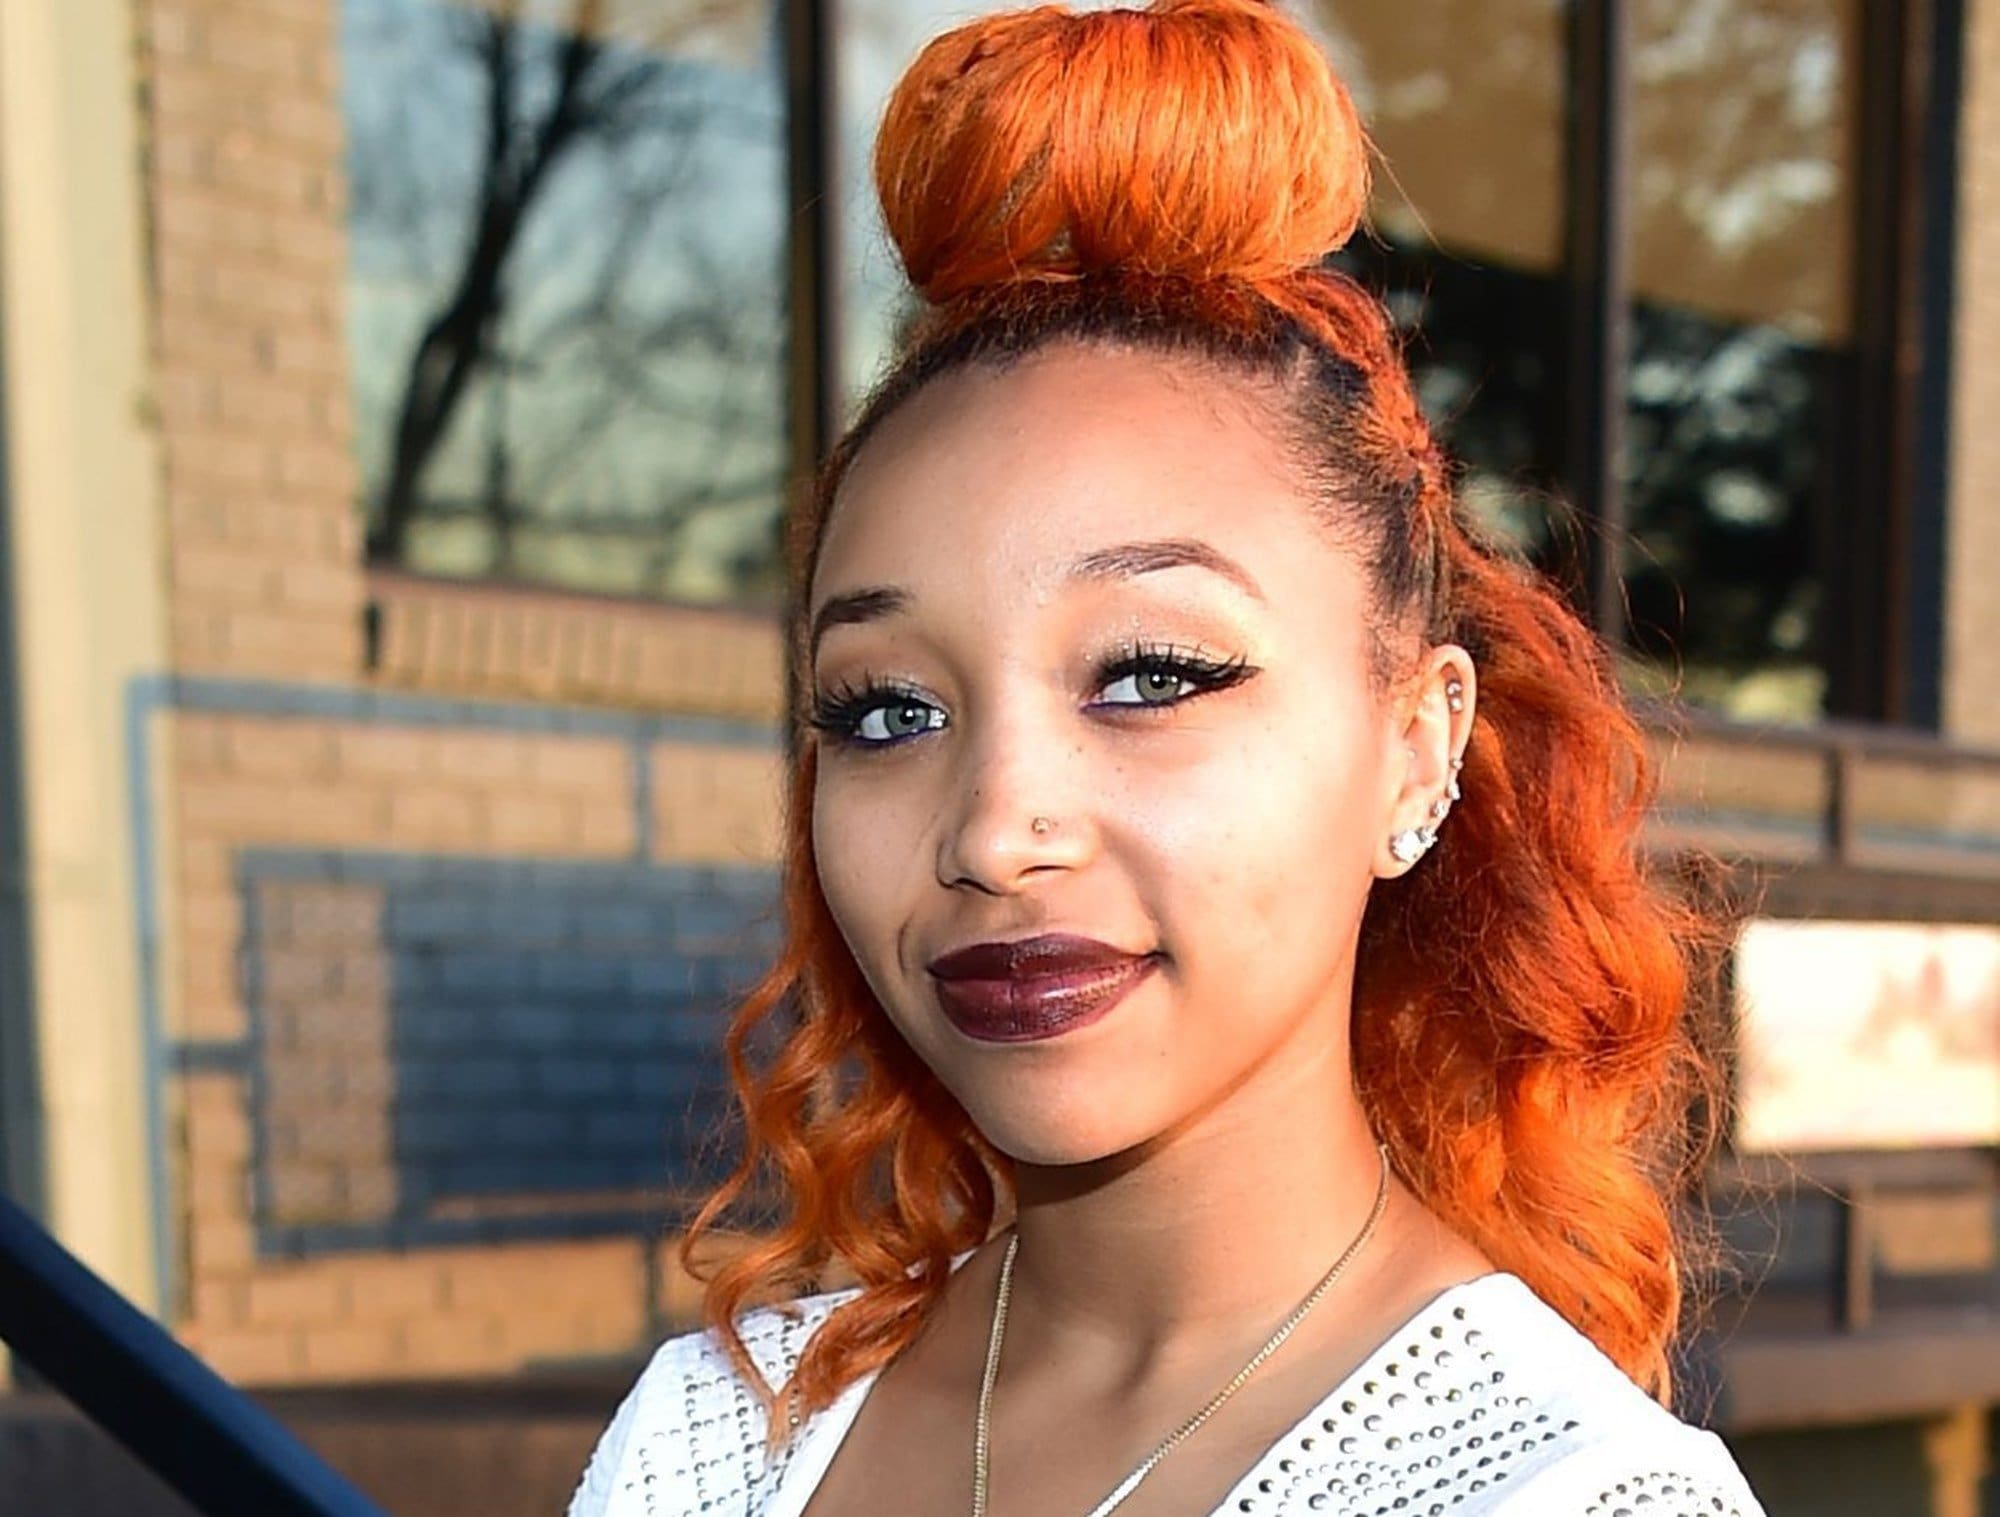 Tiny Harris' Daughter, Zonnique Pullins Looks Flawless In This Golden Dress